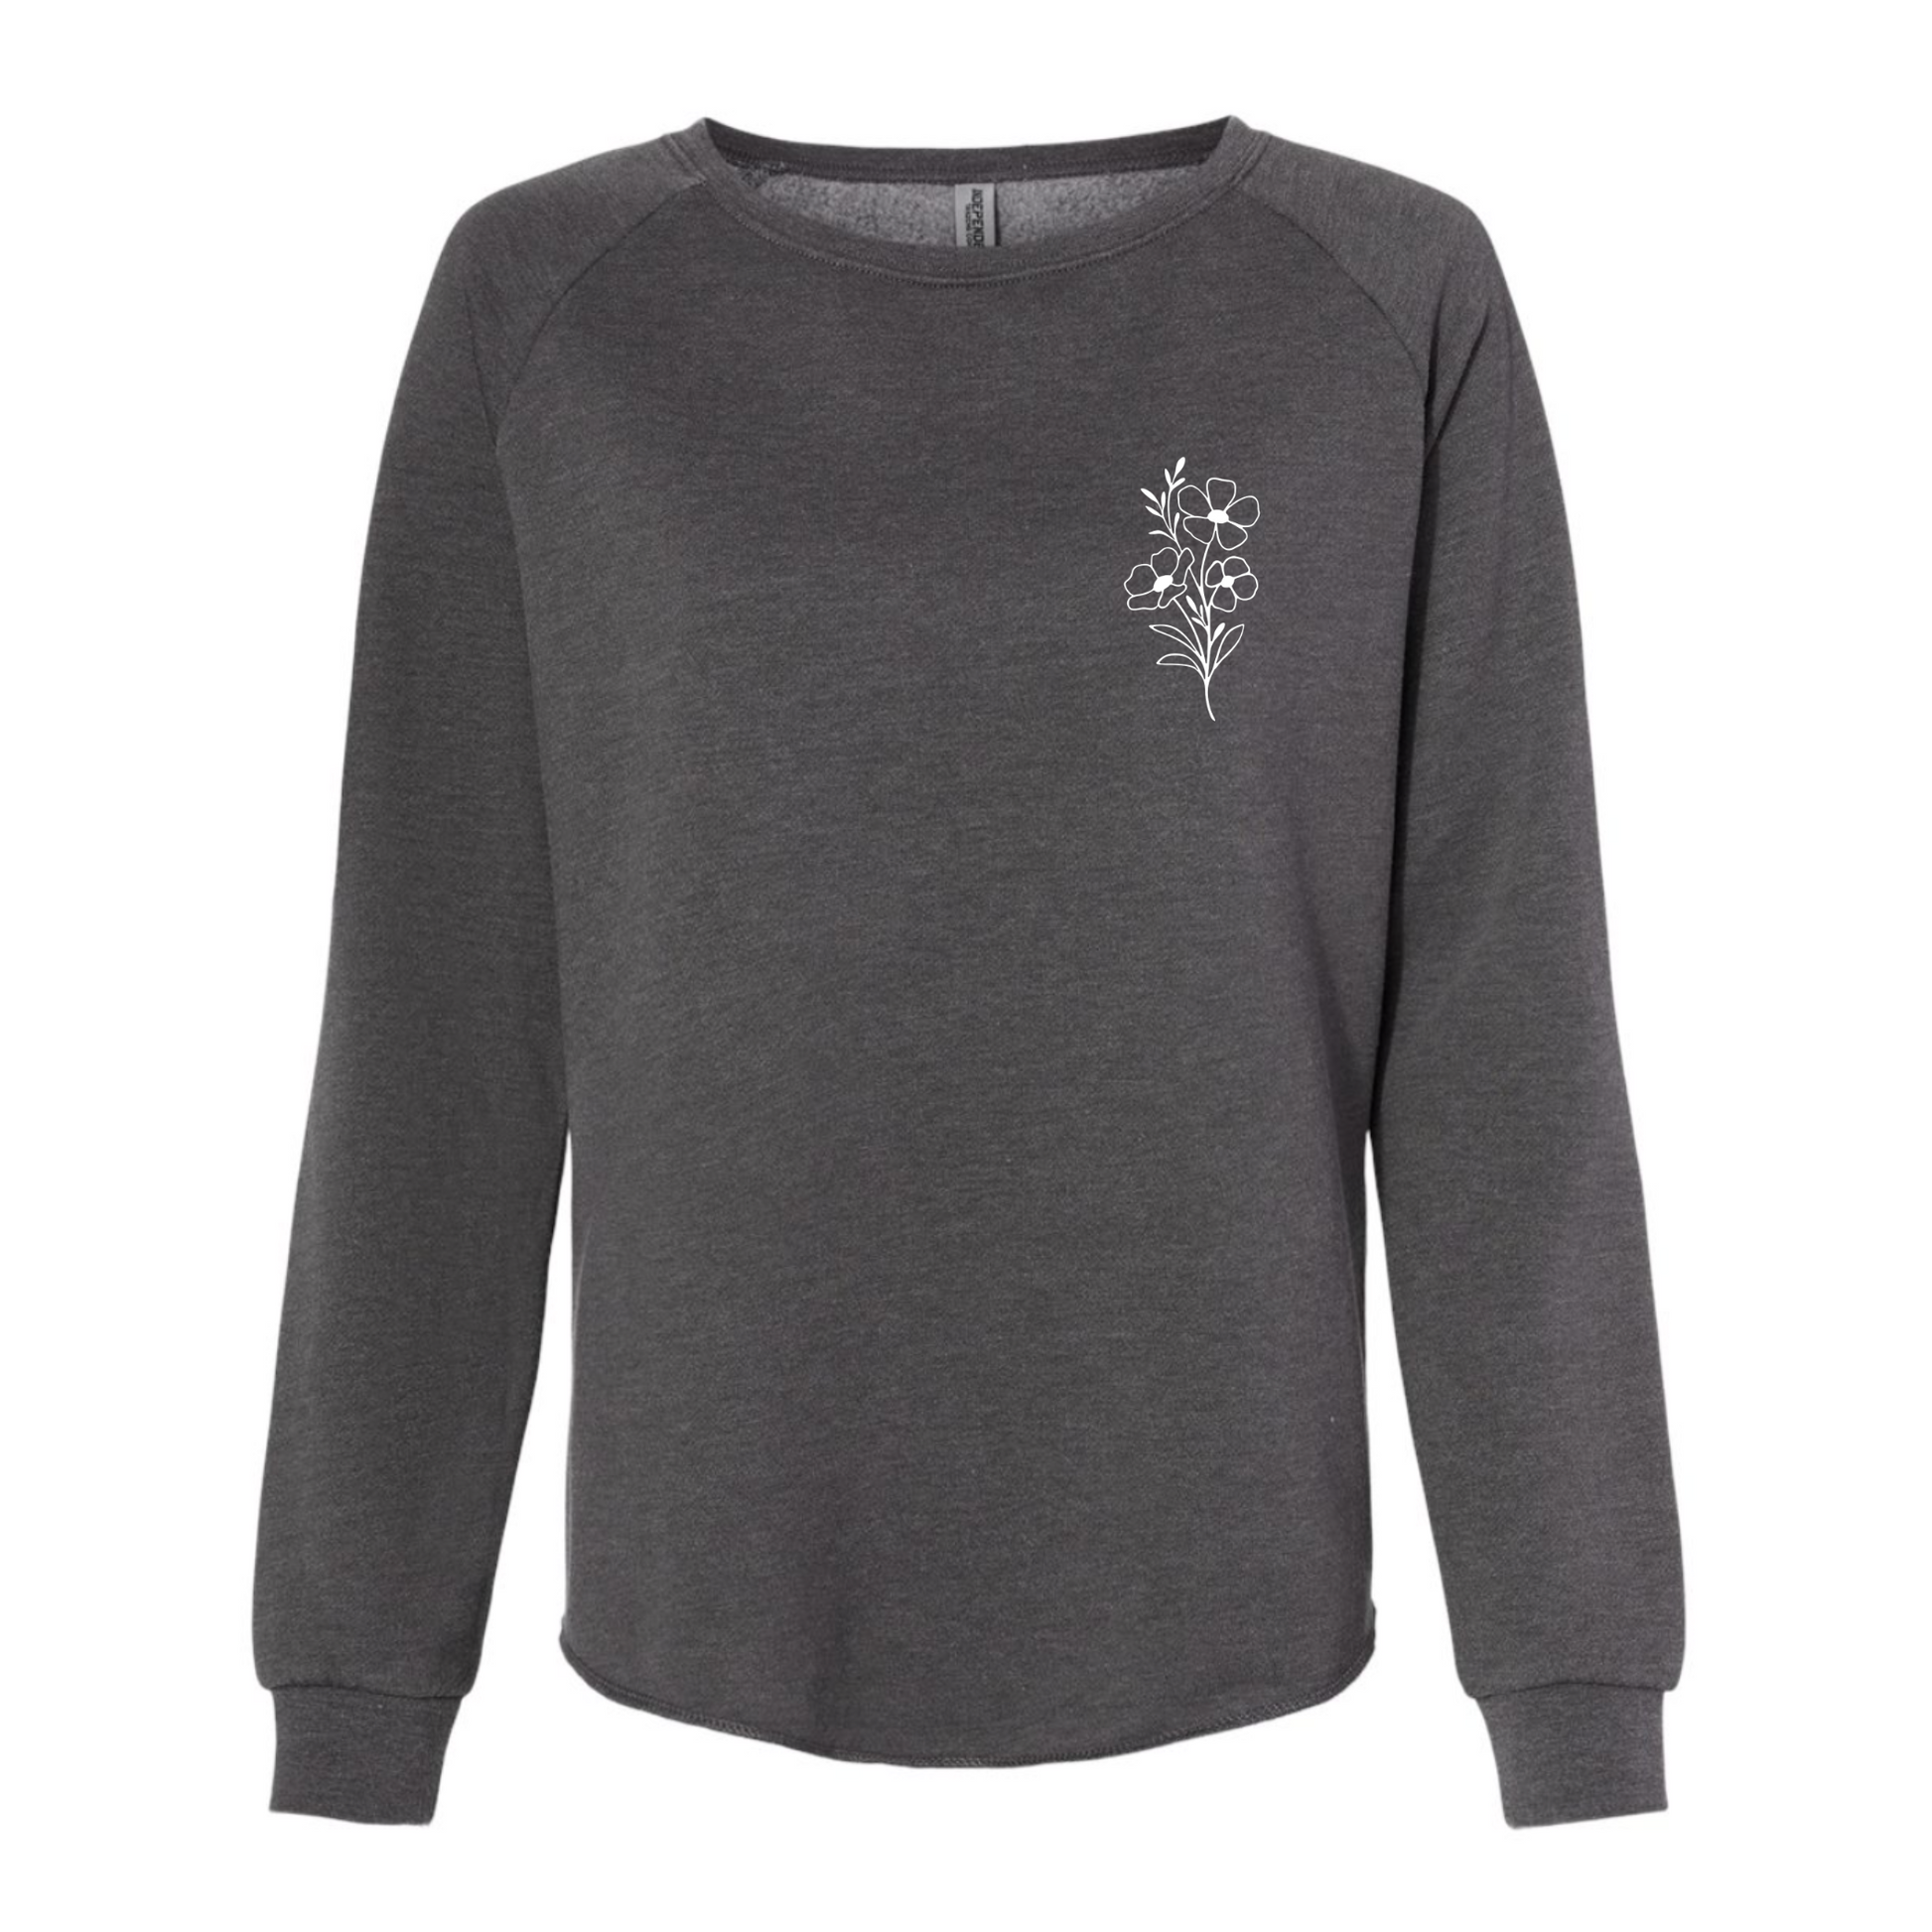 Front view of the charcoal sweatshirt with white flower emblem